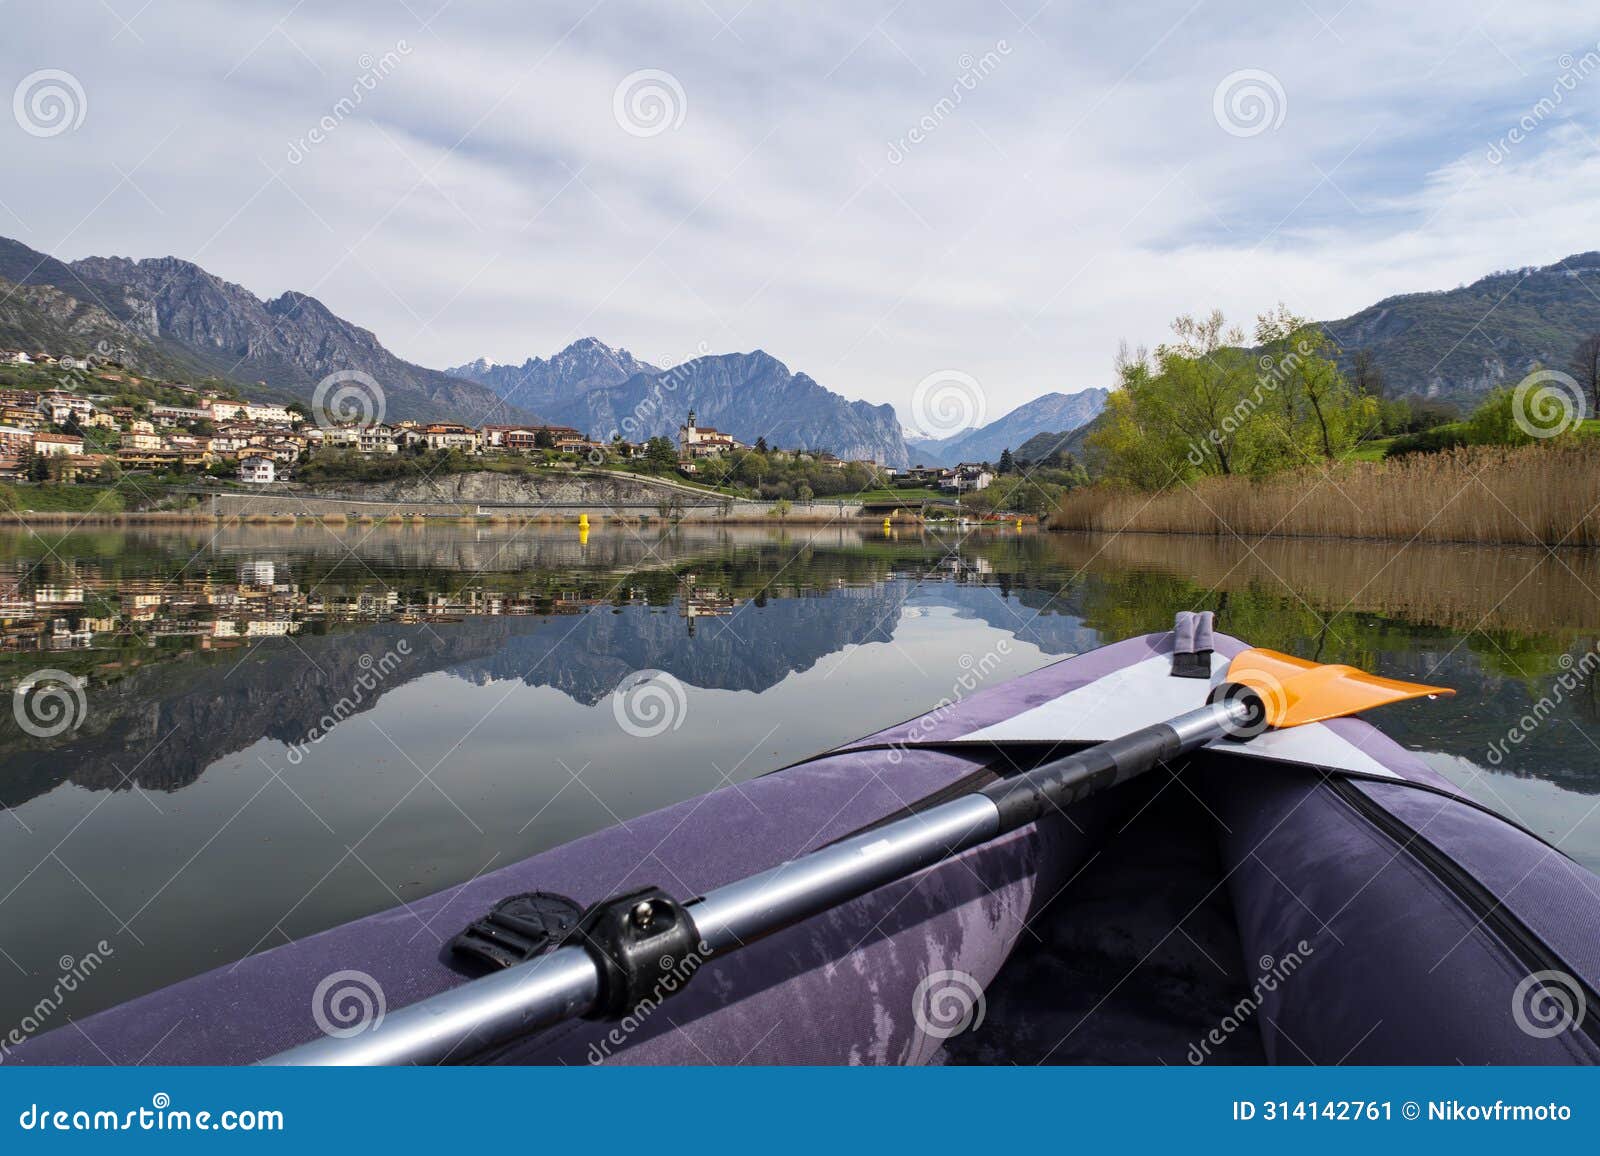 kayak on lake annone in brianza